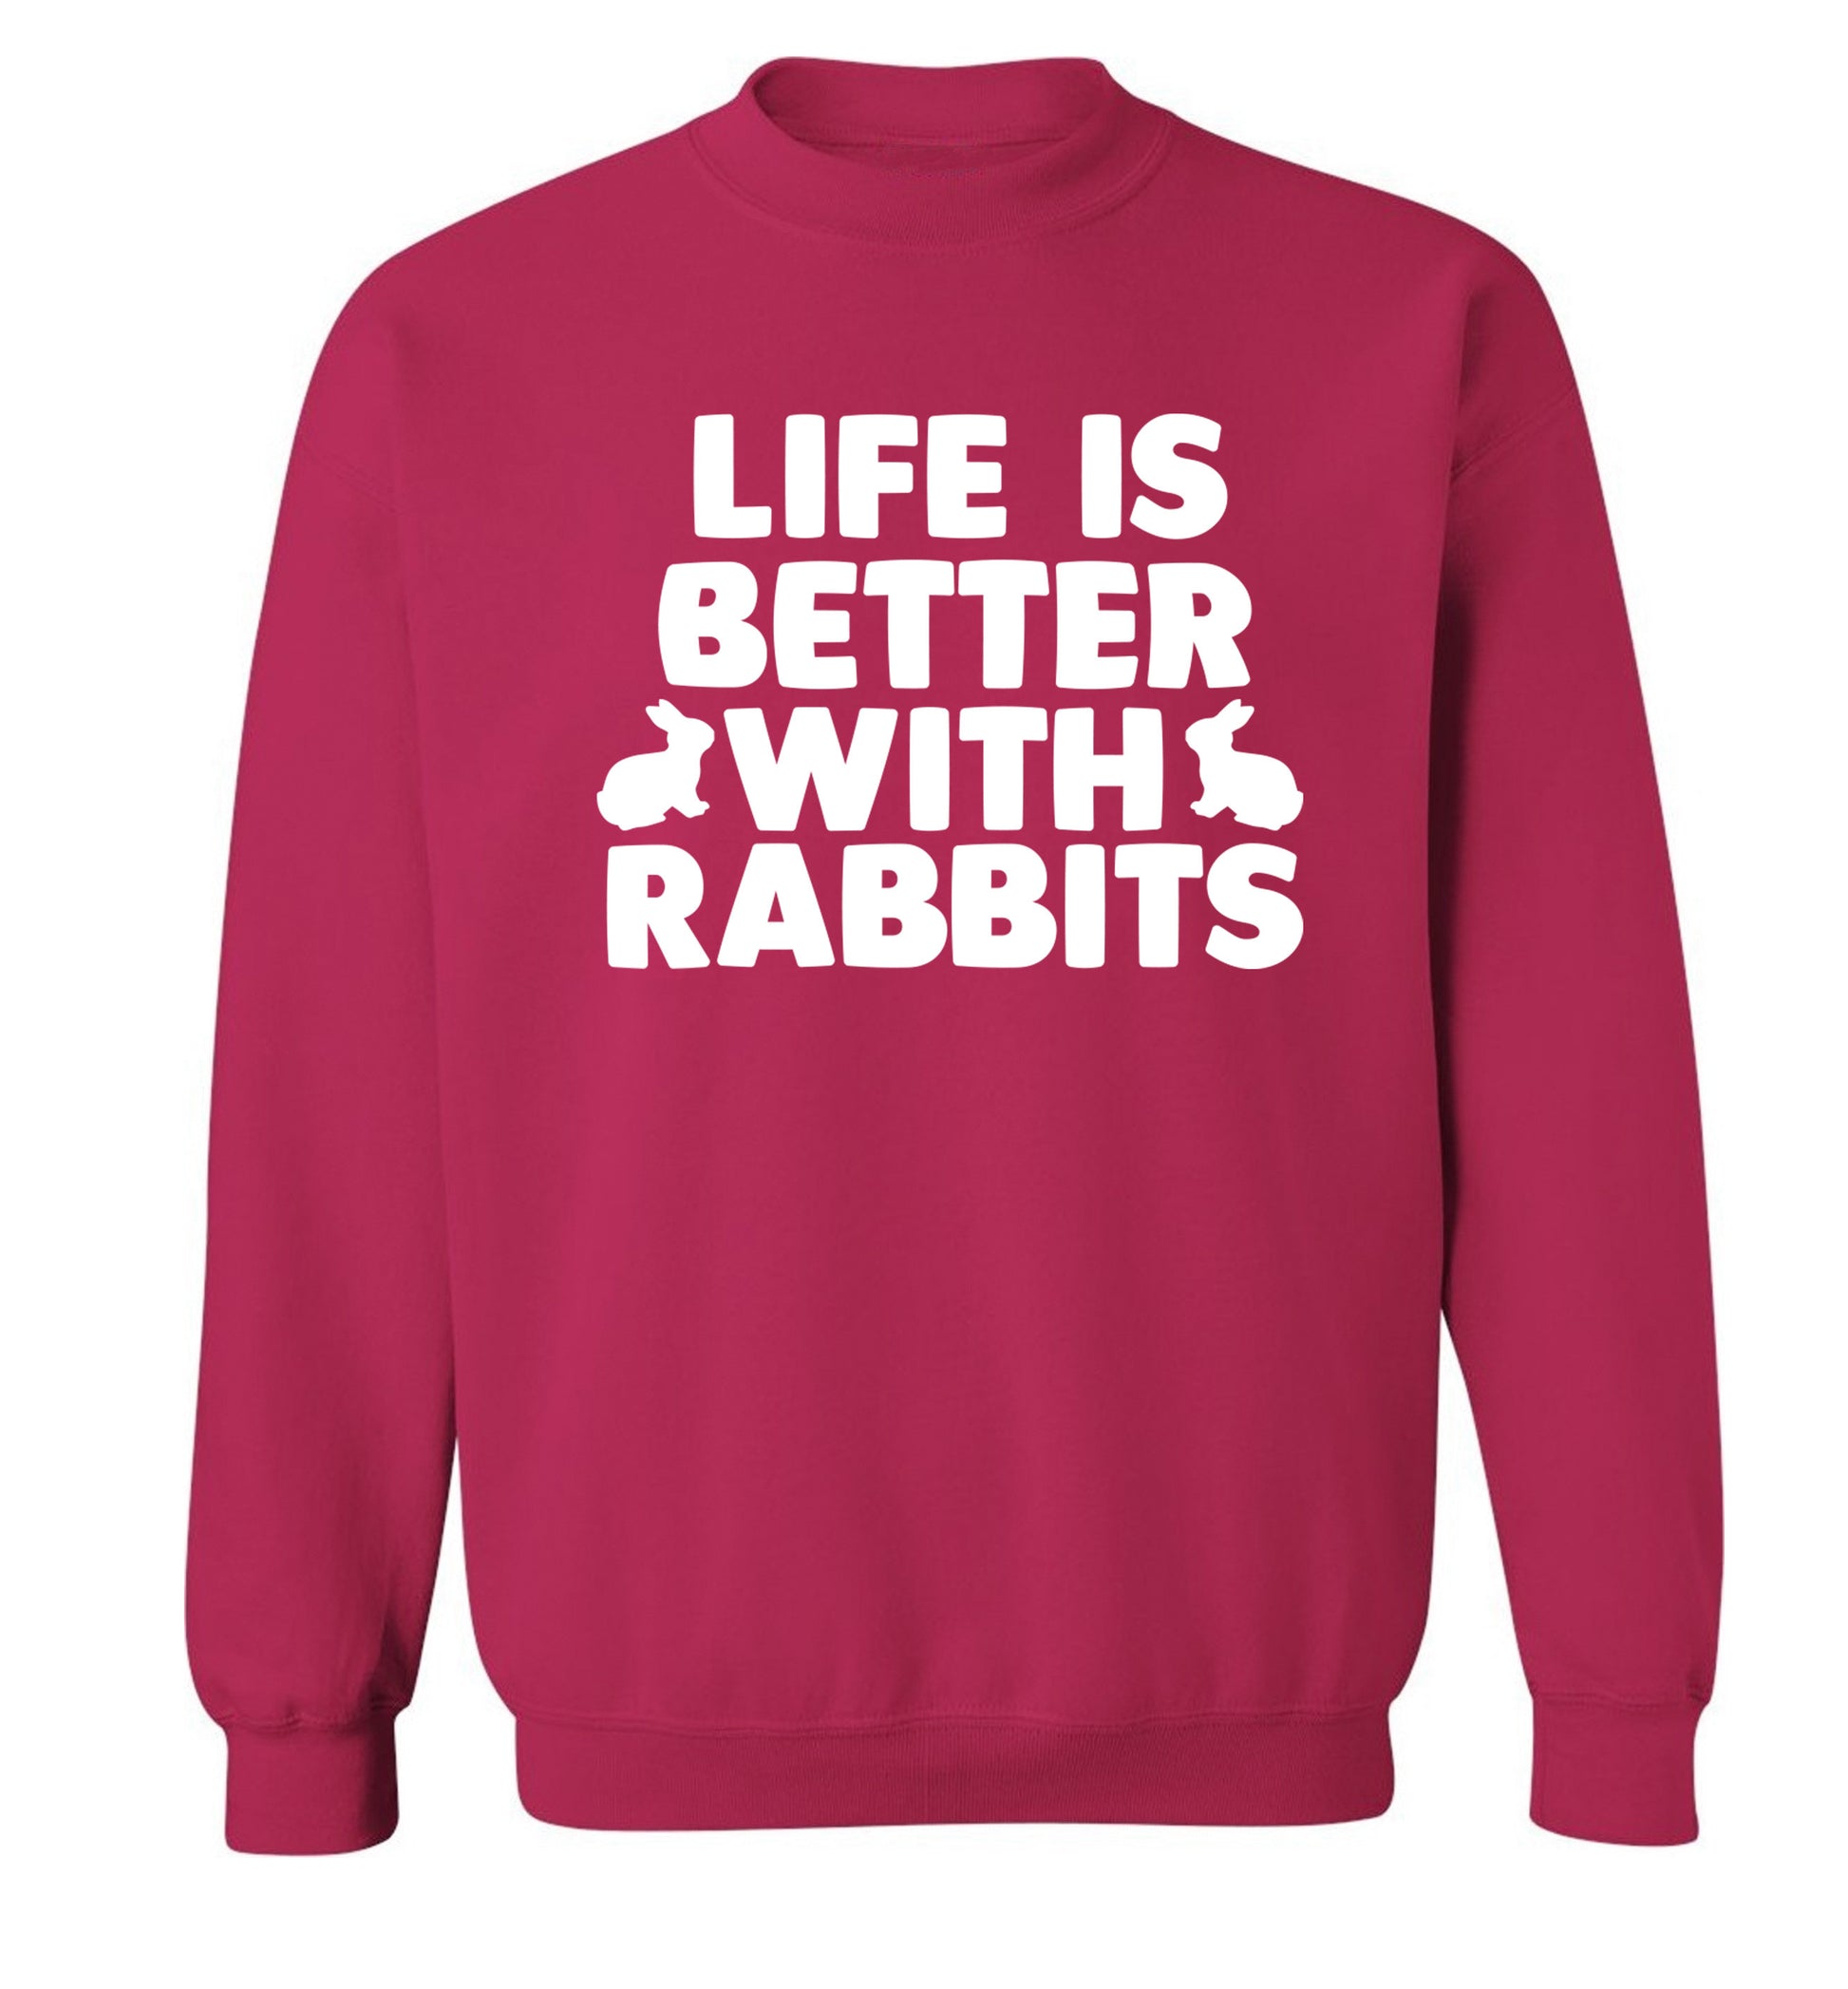 Life is better with rabbits Adult's unisex pink  sweater XL